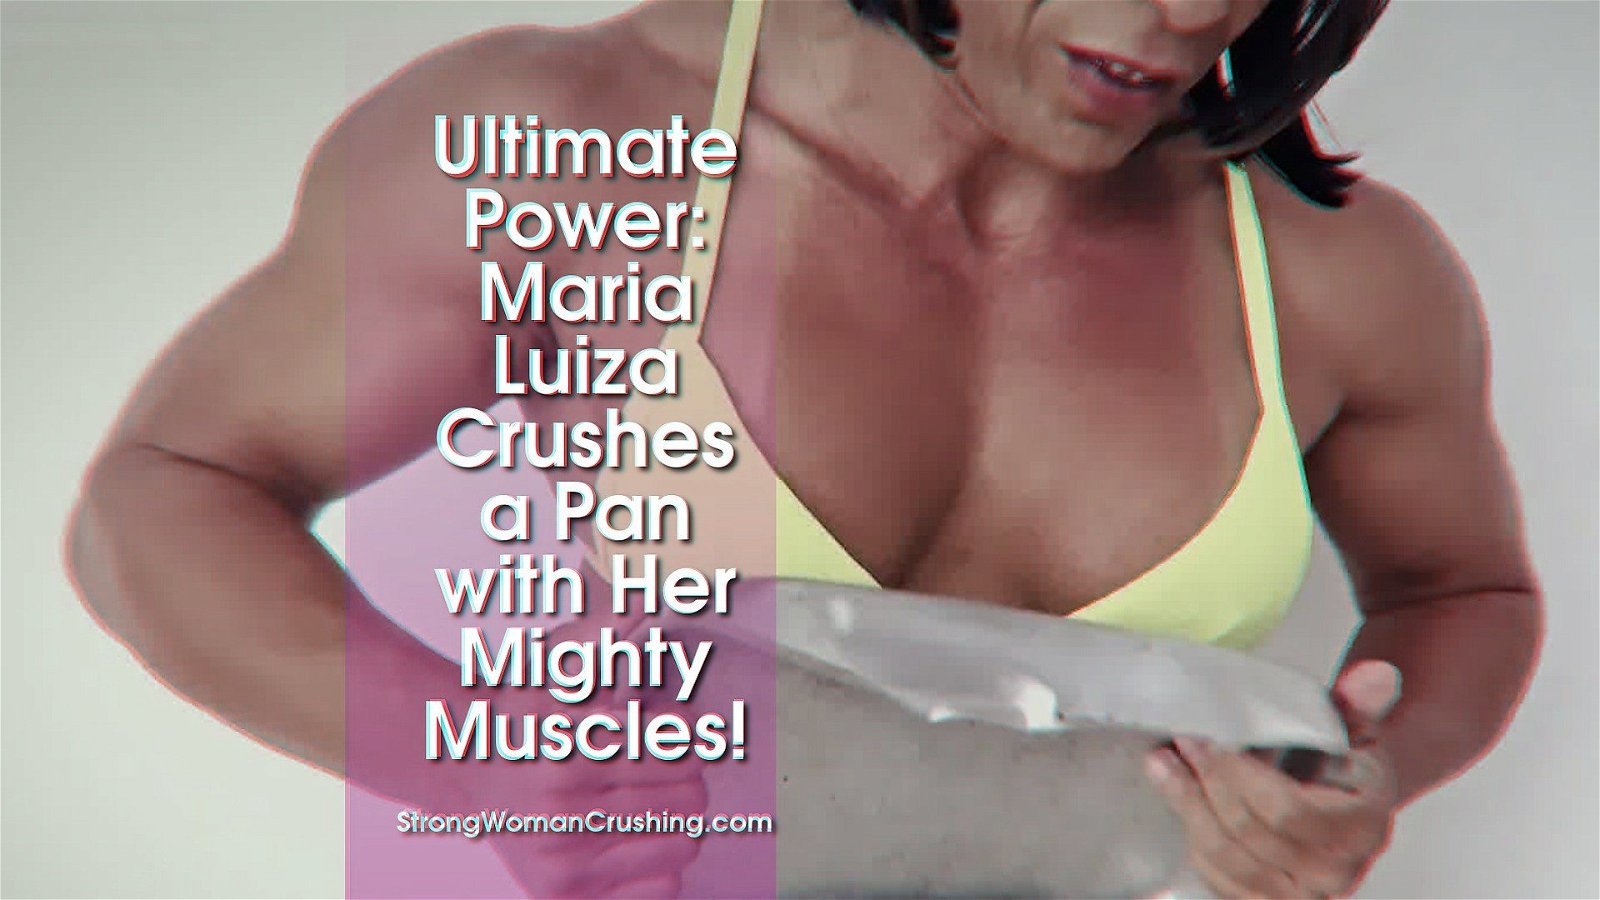 Watch the Photo by MusclegirlStrength with the username @MusclegirlStrength, who is a brand user, posted on March 4, 2024 and the text says 'Ultimate Power: Maria Luiza Crushes a Pan with Her Mighty Muscles!
Full Video: fbbstrength.com

Embrace the power and beauty of muscular female bodybuilders on our site - witness them flex, crush, and conquer with their incredible strength!..'